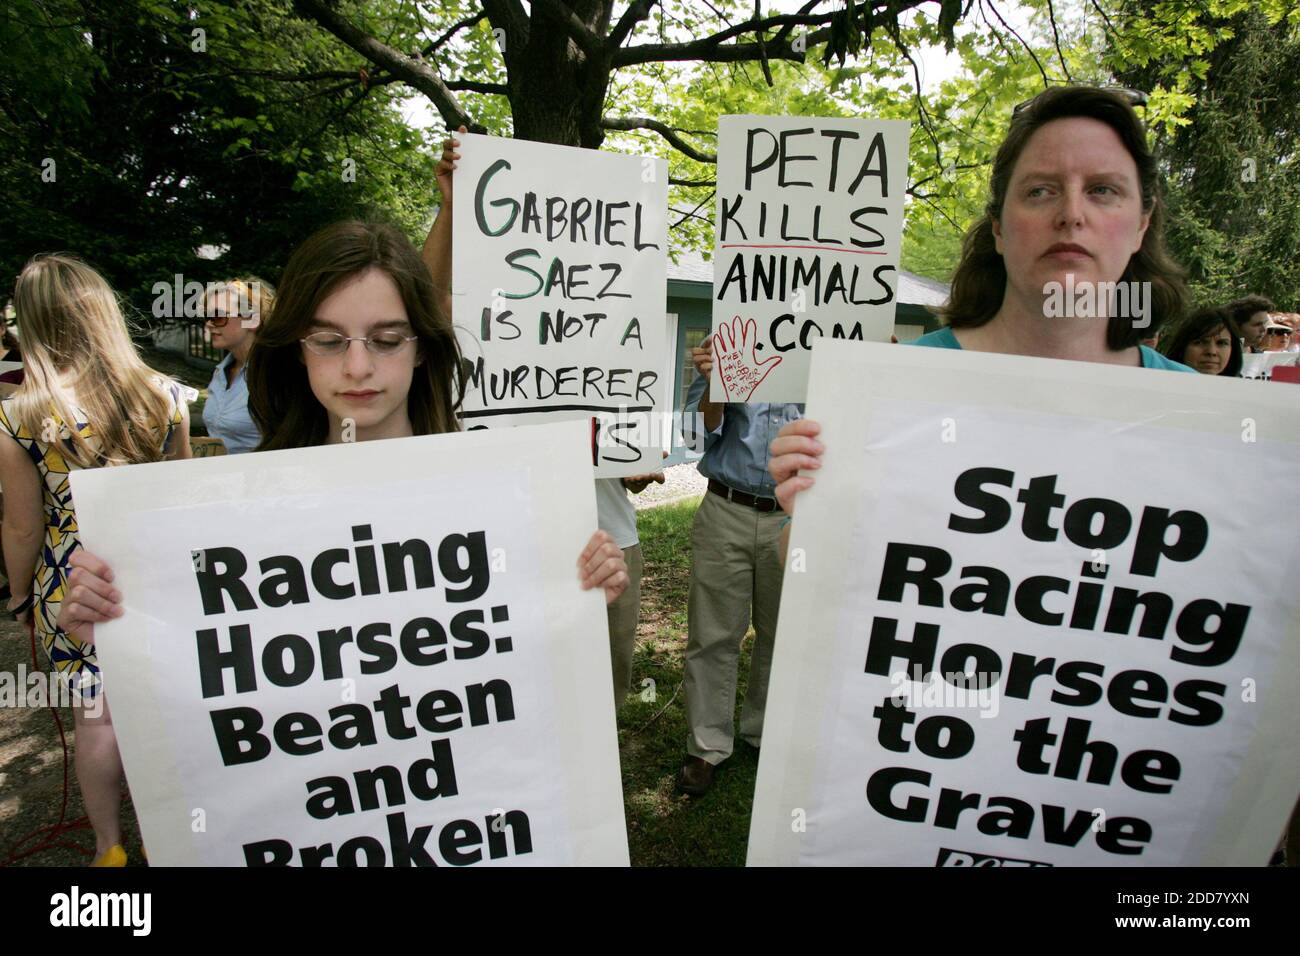 NO FILM, NO VIDEO, NO TV, NO DOCUMENTARY - Abby Greenstein, left, and Kelly Greenstein from Lexington, Kentucky, hold signs protesting the racing industry, while horse industry supporters hold their own signs, at the Kentucky Horse Racing Authority's headquarters in Lexington, KY, USA on May 6, 2008. PETA has urged the suspension of jockey Gabriel Saez for what it viewed as excessive whipping of Eight Belles during the Kentucky Derby. Photo by Jenn Ackerman/Lexington Herald-Leader/MCT/ABACAPRESS.COM Stock Photo